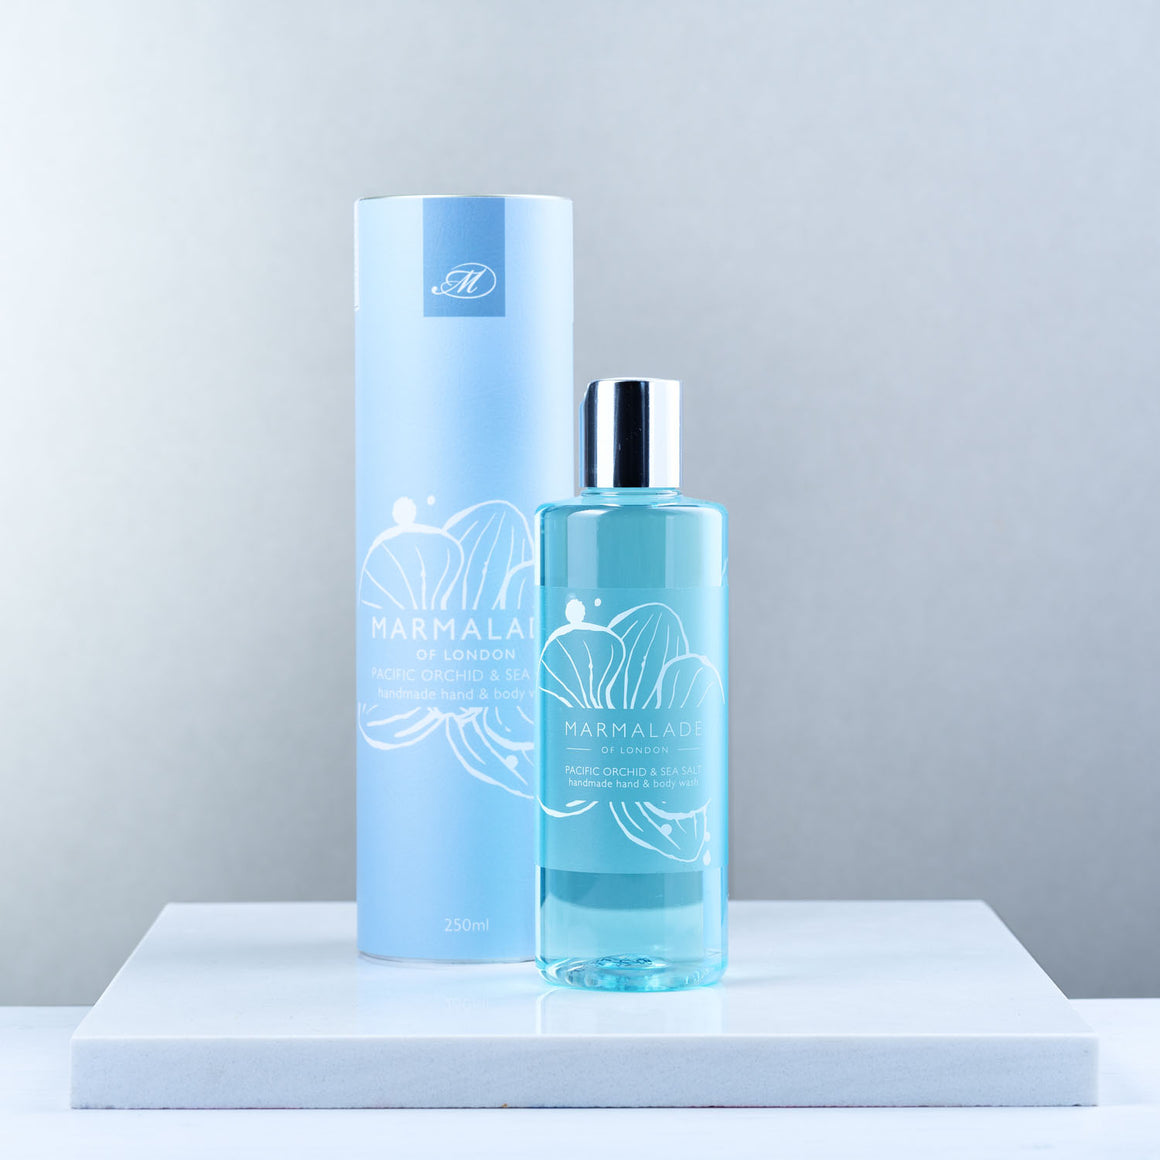 Marmalade of London Pacific Orchid & Sea Salt Hand & Body Wash with light blue packaging